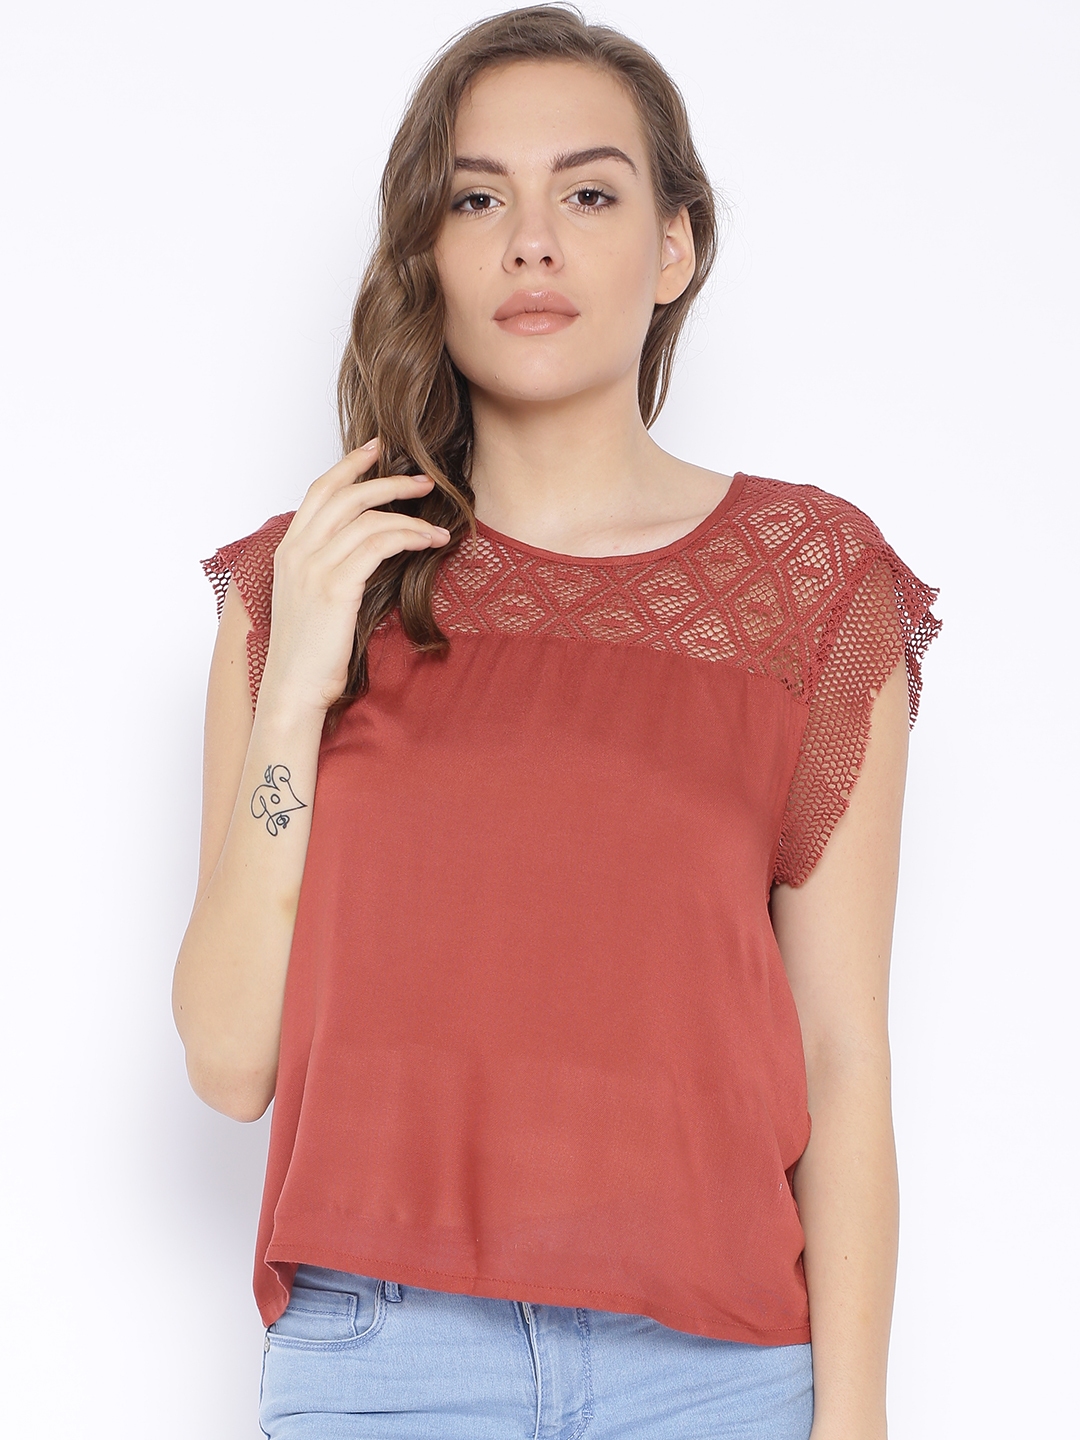 Buy ONLY Brick Red Top - Tops for Women 1282882 | Myntra